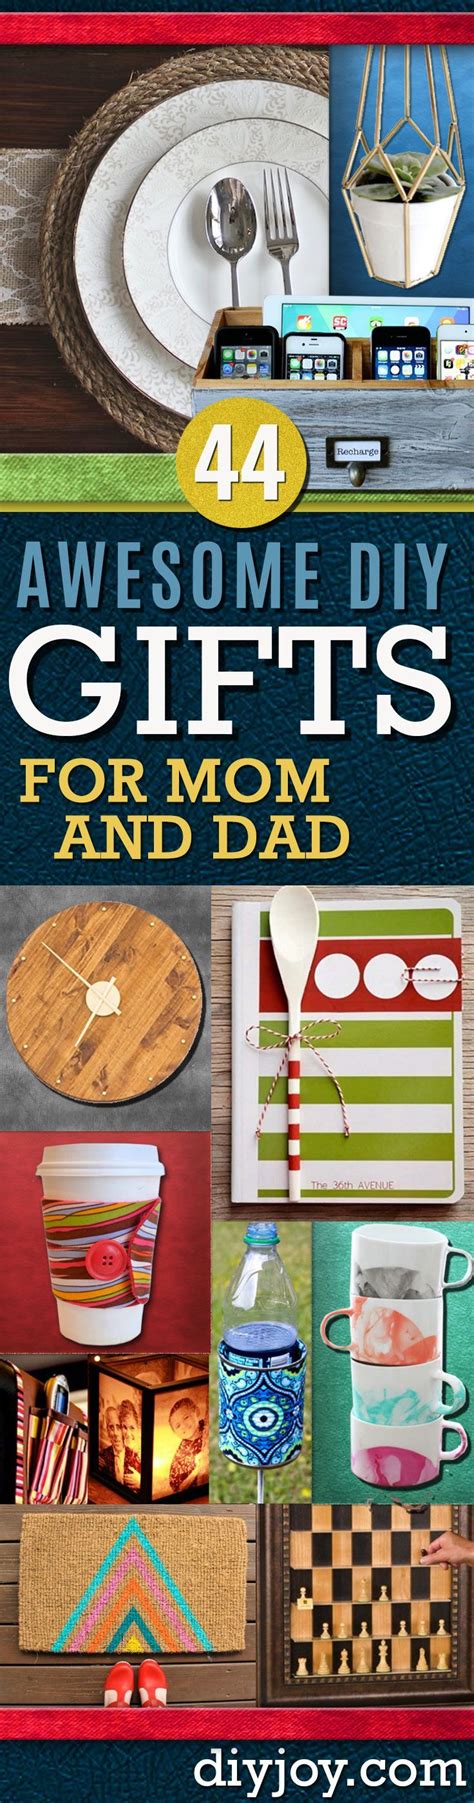 Make this holiday special for your loved ones with a personalized photo gift this year. 44 DIY Gift Ideas For Mom and Dad | Diy gifts for mom ...